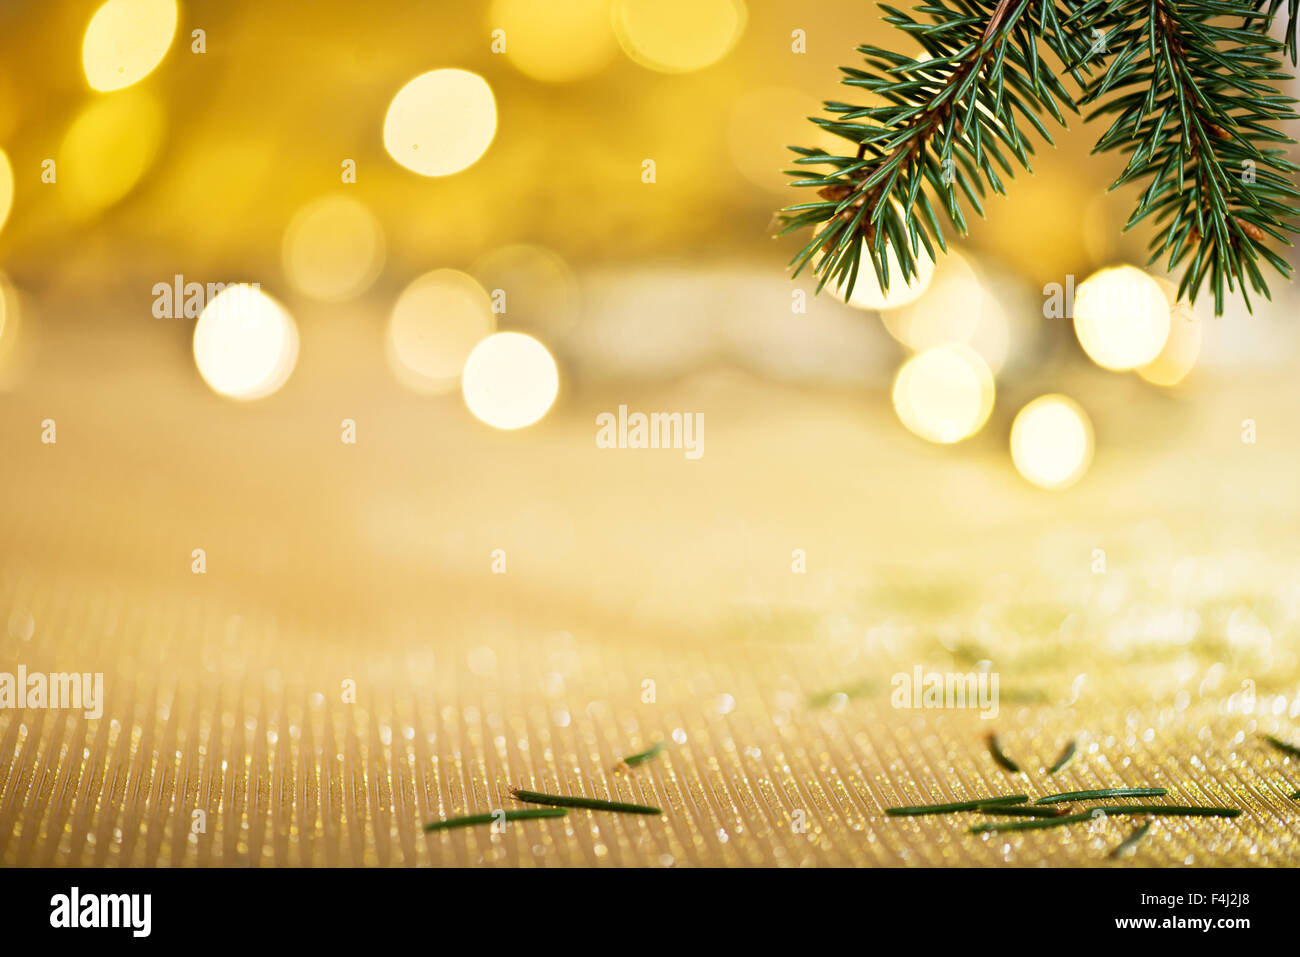 Christmas background with needles and color lights Stock Photo